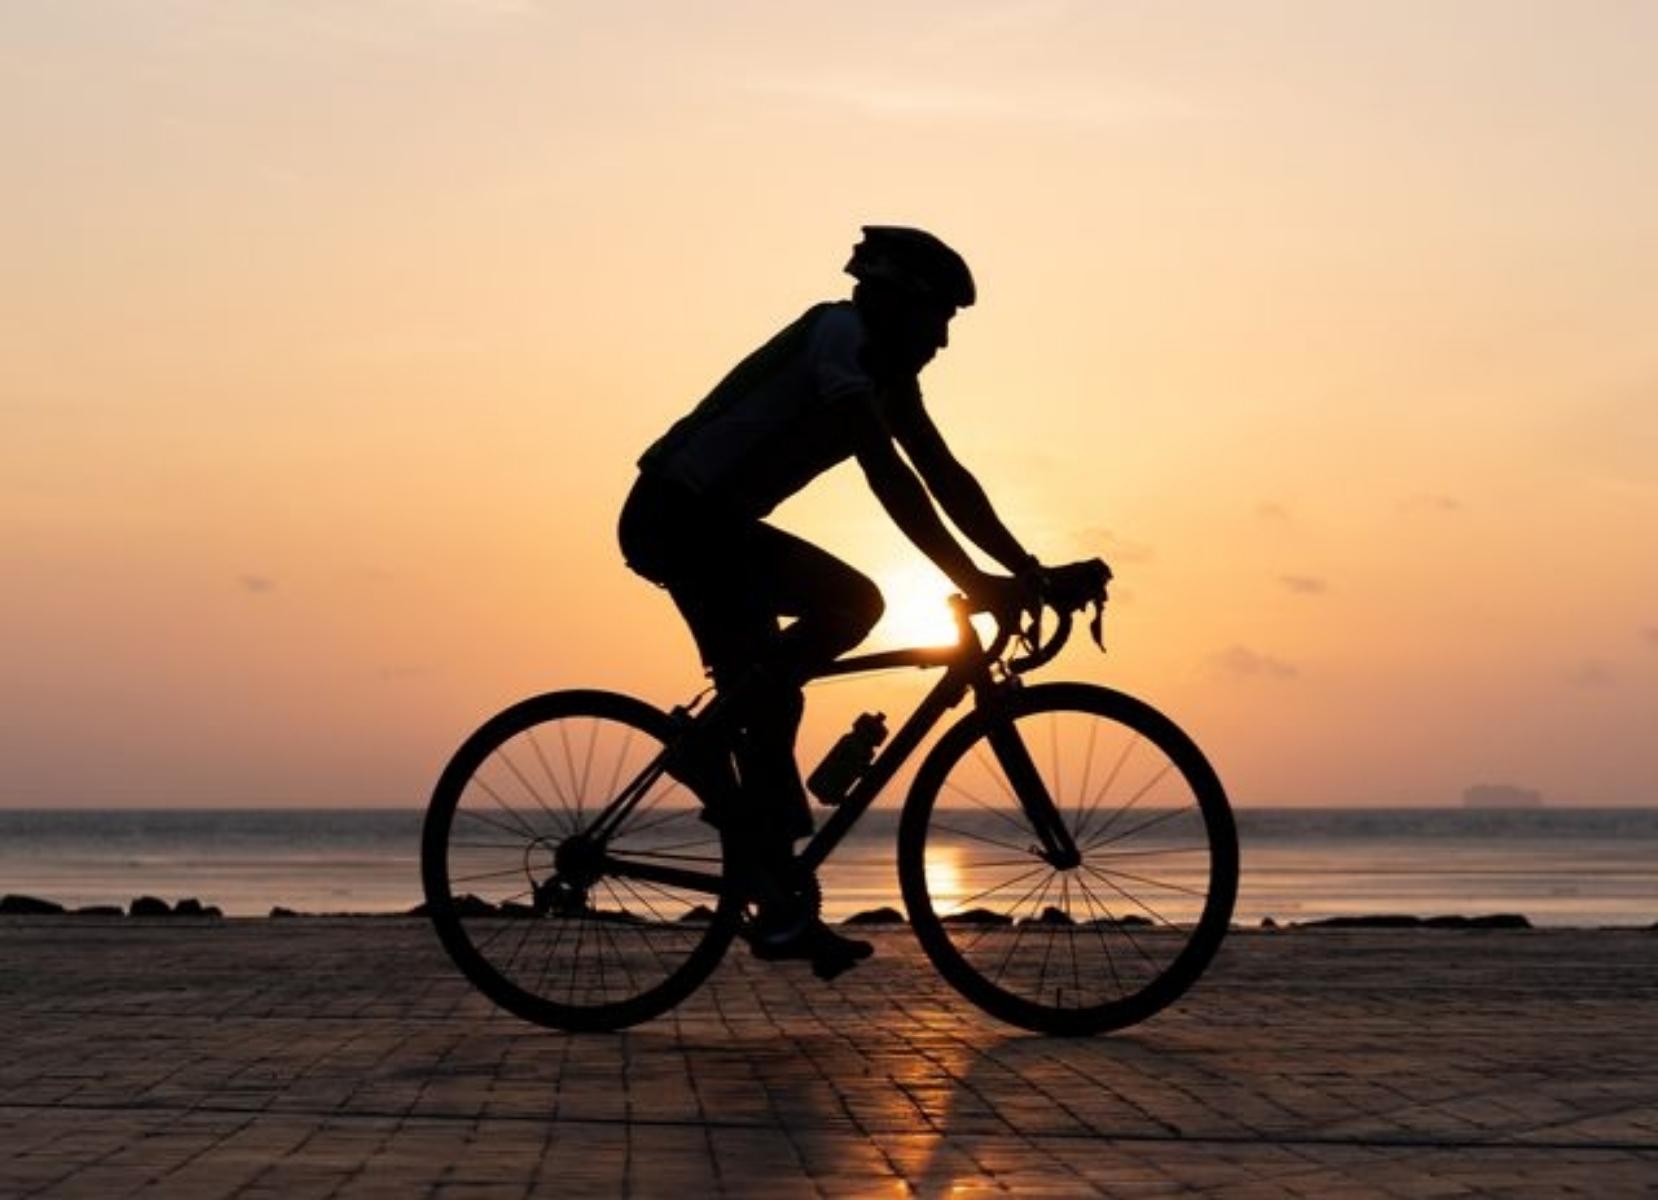 THE TIME OF DAY YOU GO FOR A RIDE CAN INFLUENCE THE RESULTS